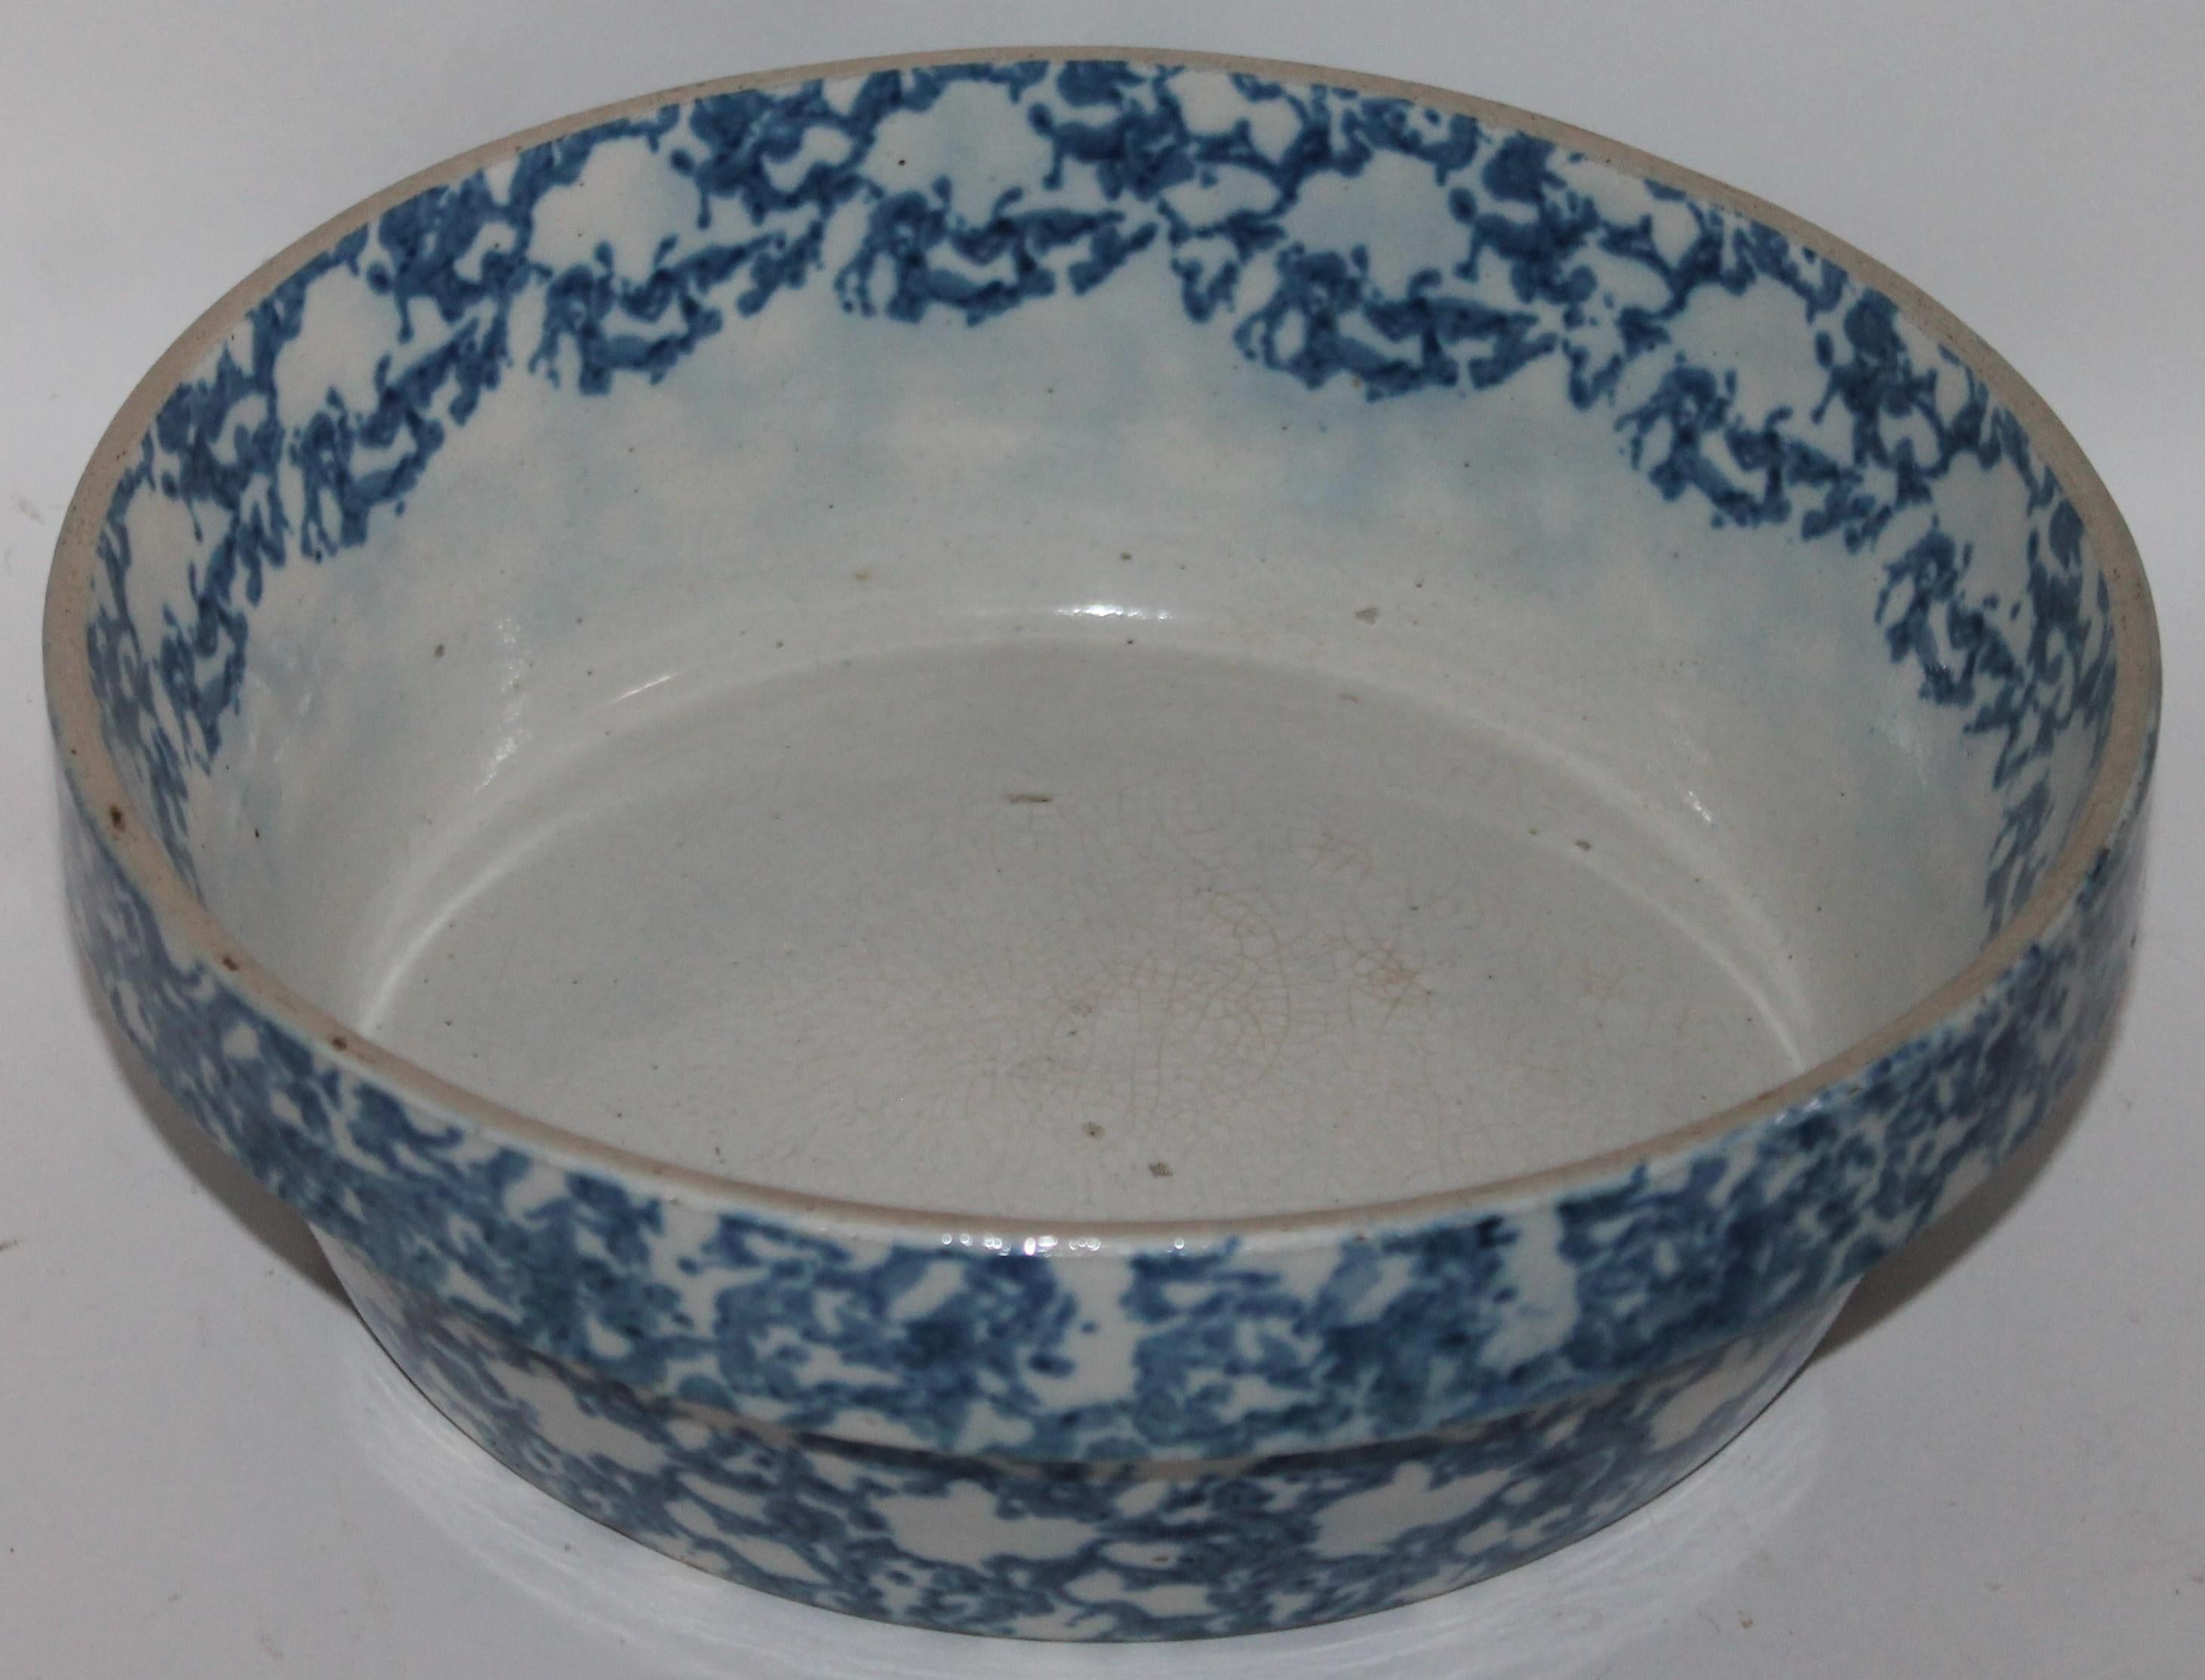 This fine sponge ware pottery bake dish in fine condition. This is a sponge design pattern. This is in very good condition.